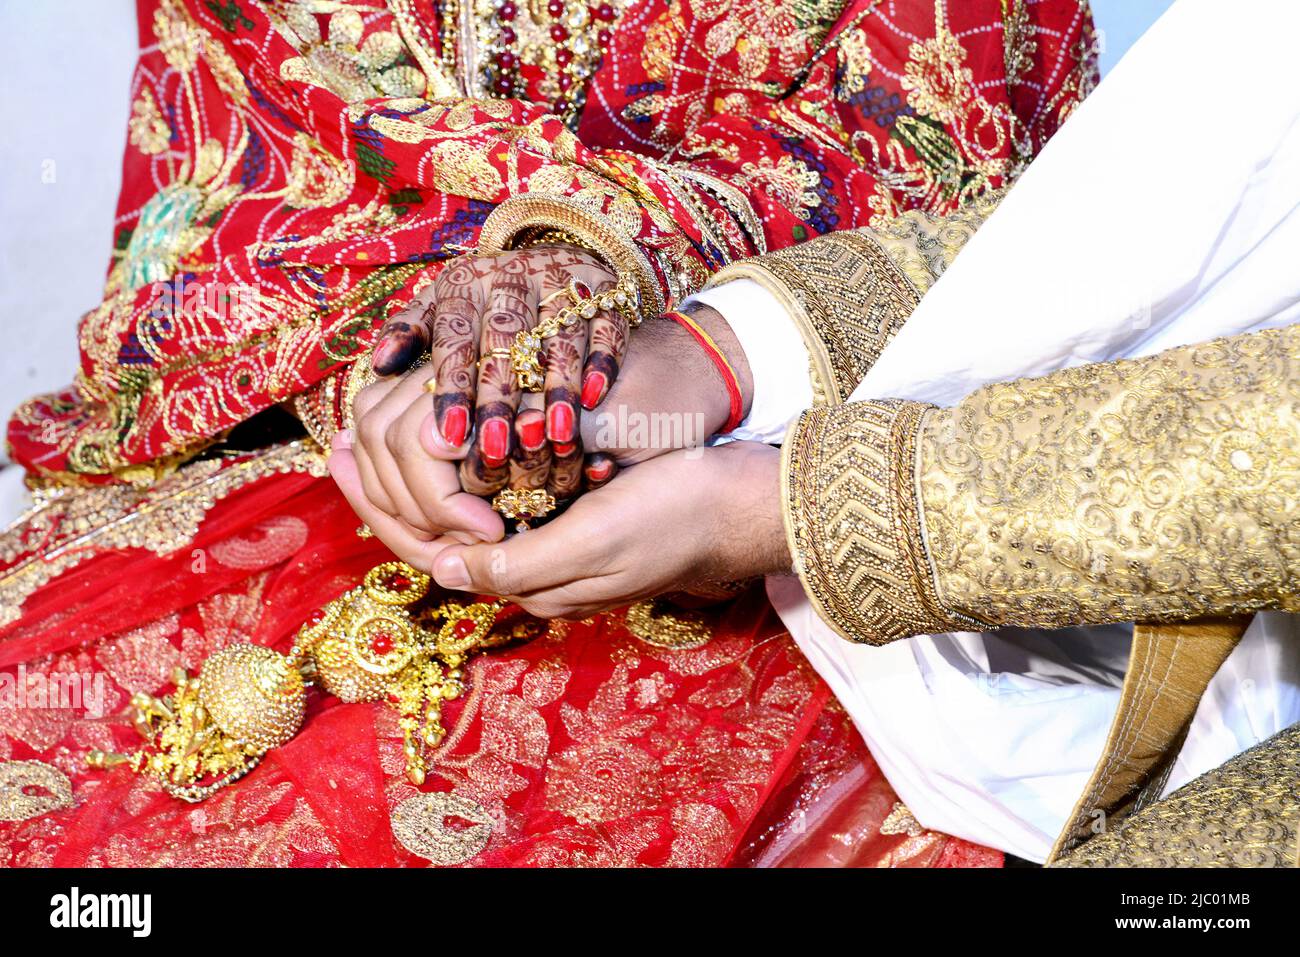 An Indian bride and groom's hand being tied together before the wedding rituals Stock Photo